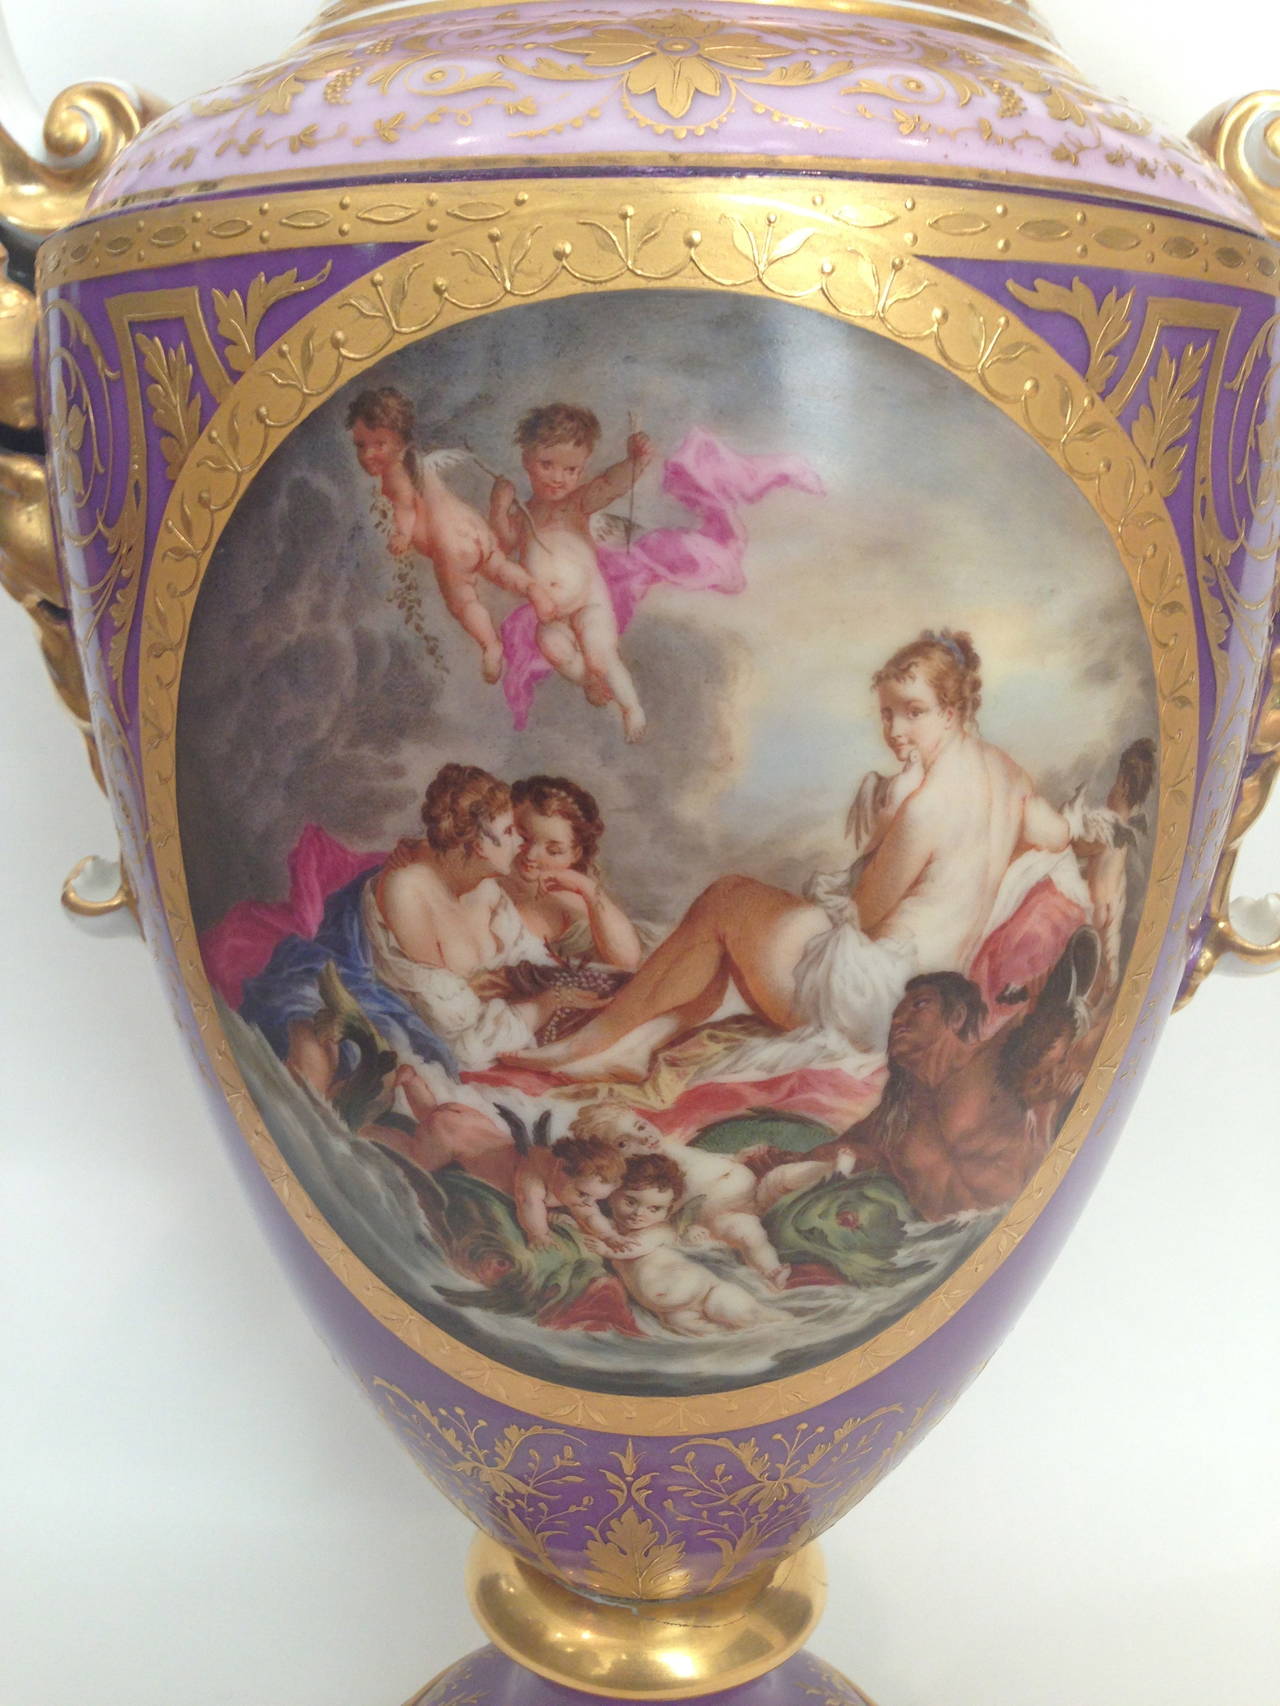 Extremely Rare Vienna Porcelain Covered Urns Fantastic Color, 19th Century For Sale 2